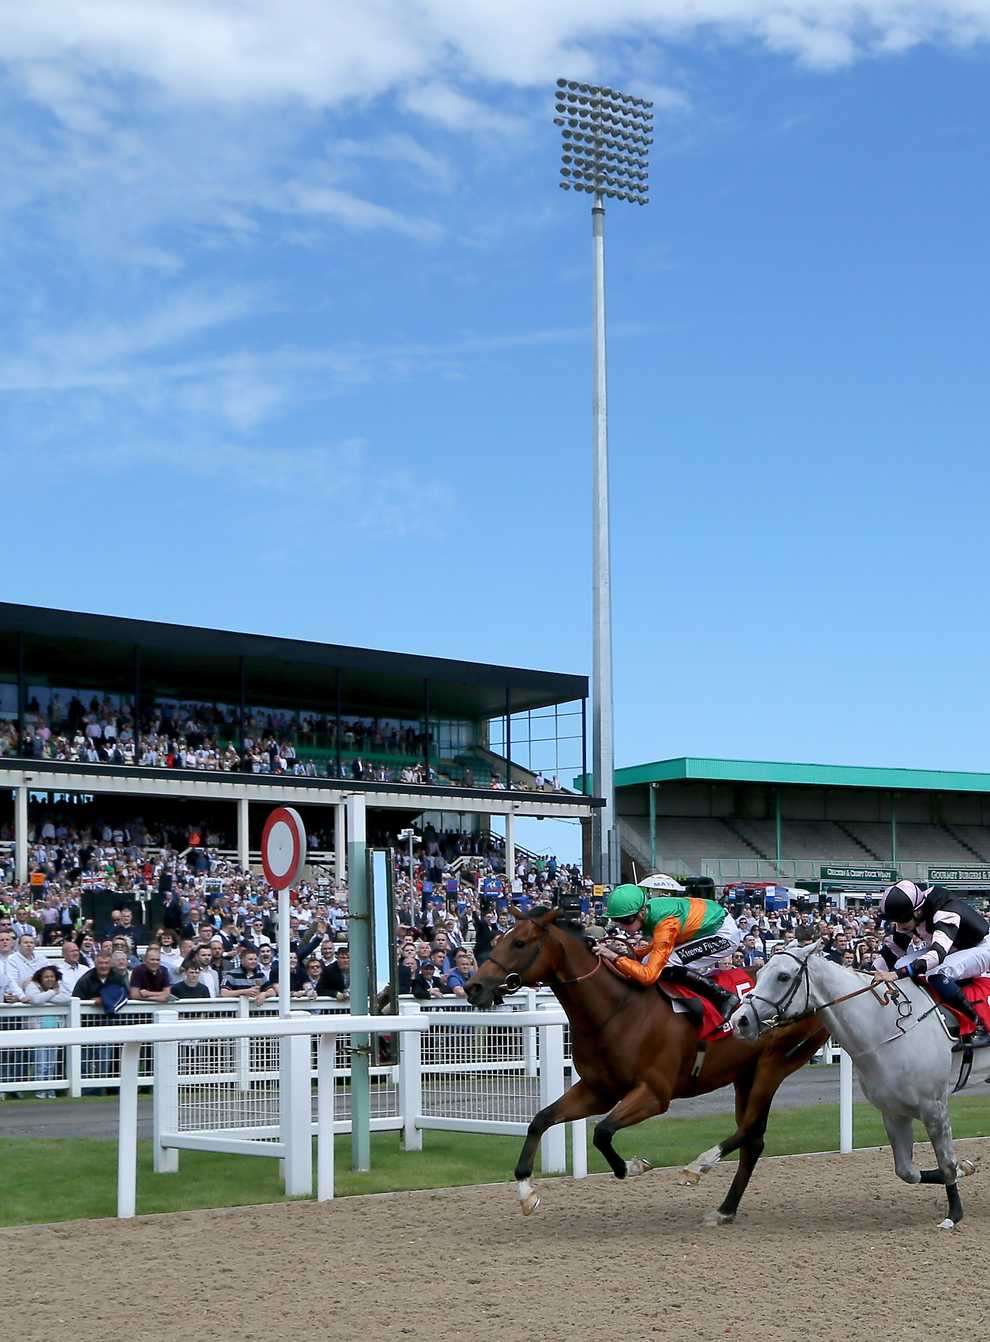 Newcastle will play host to the first fixture when racing resumes in Britain on June 1